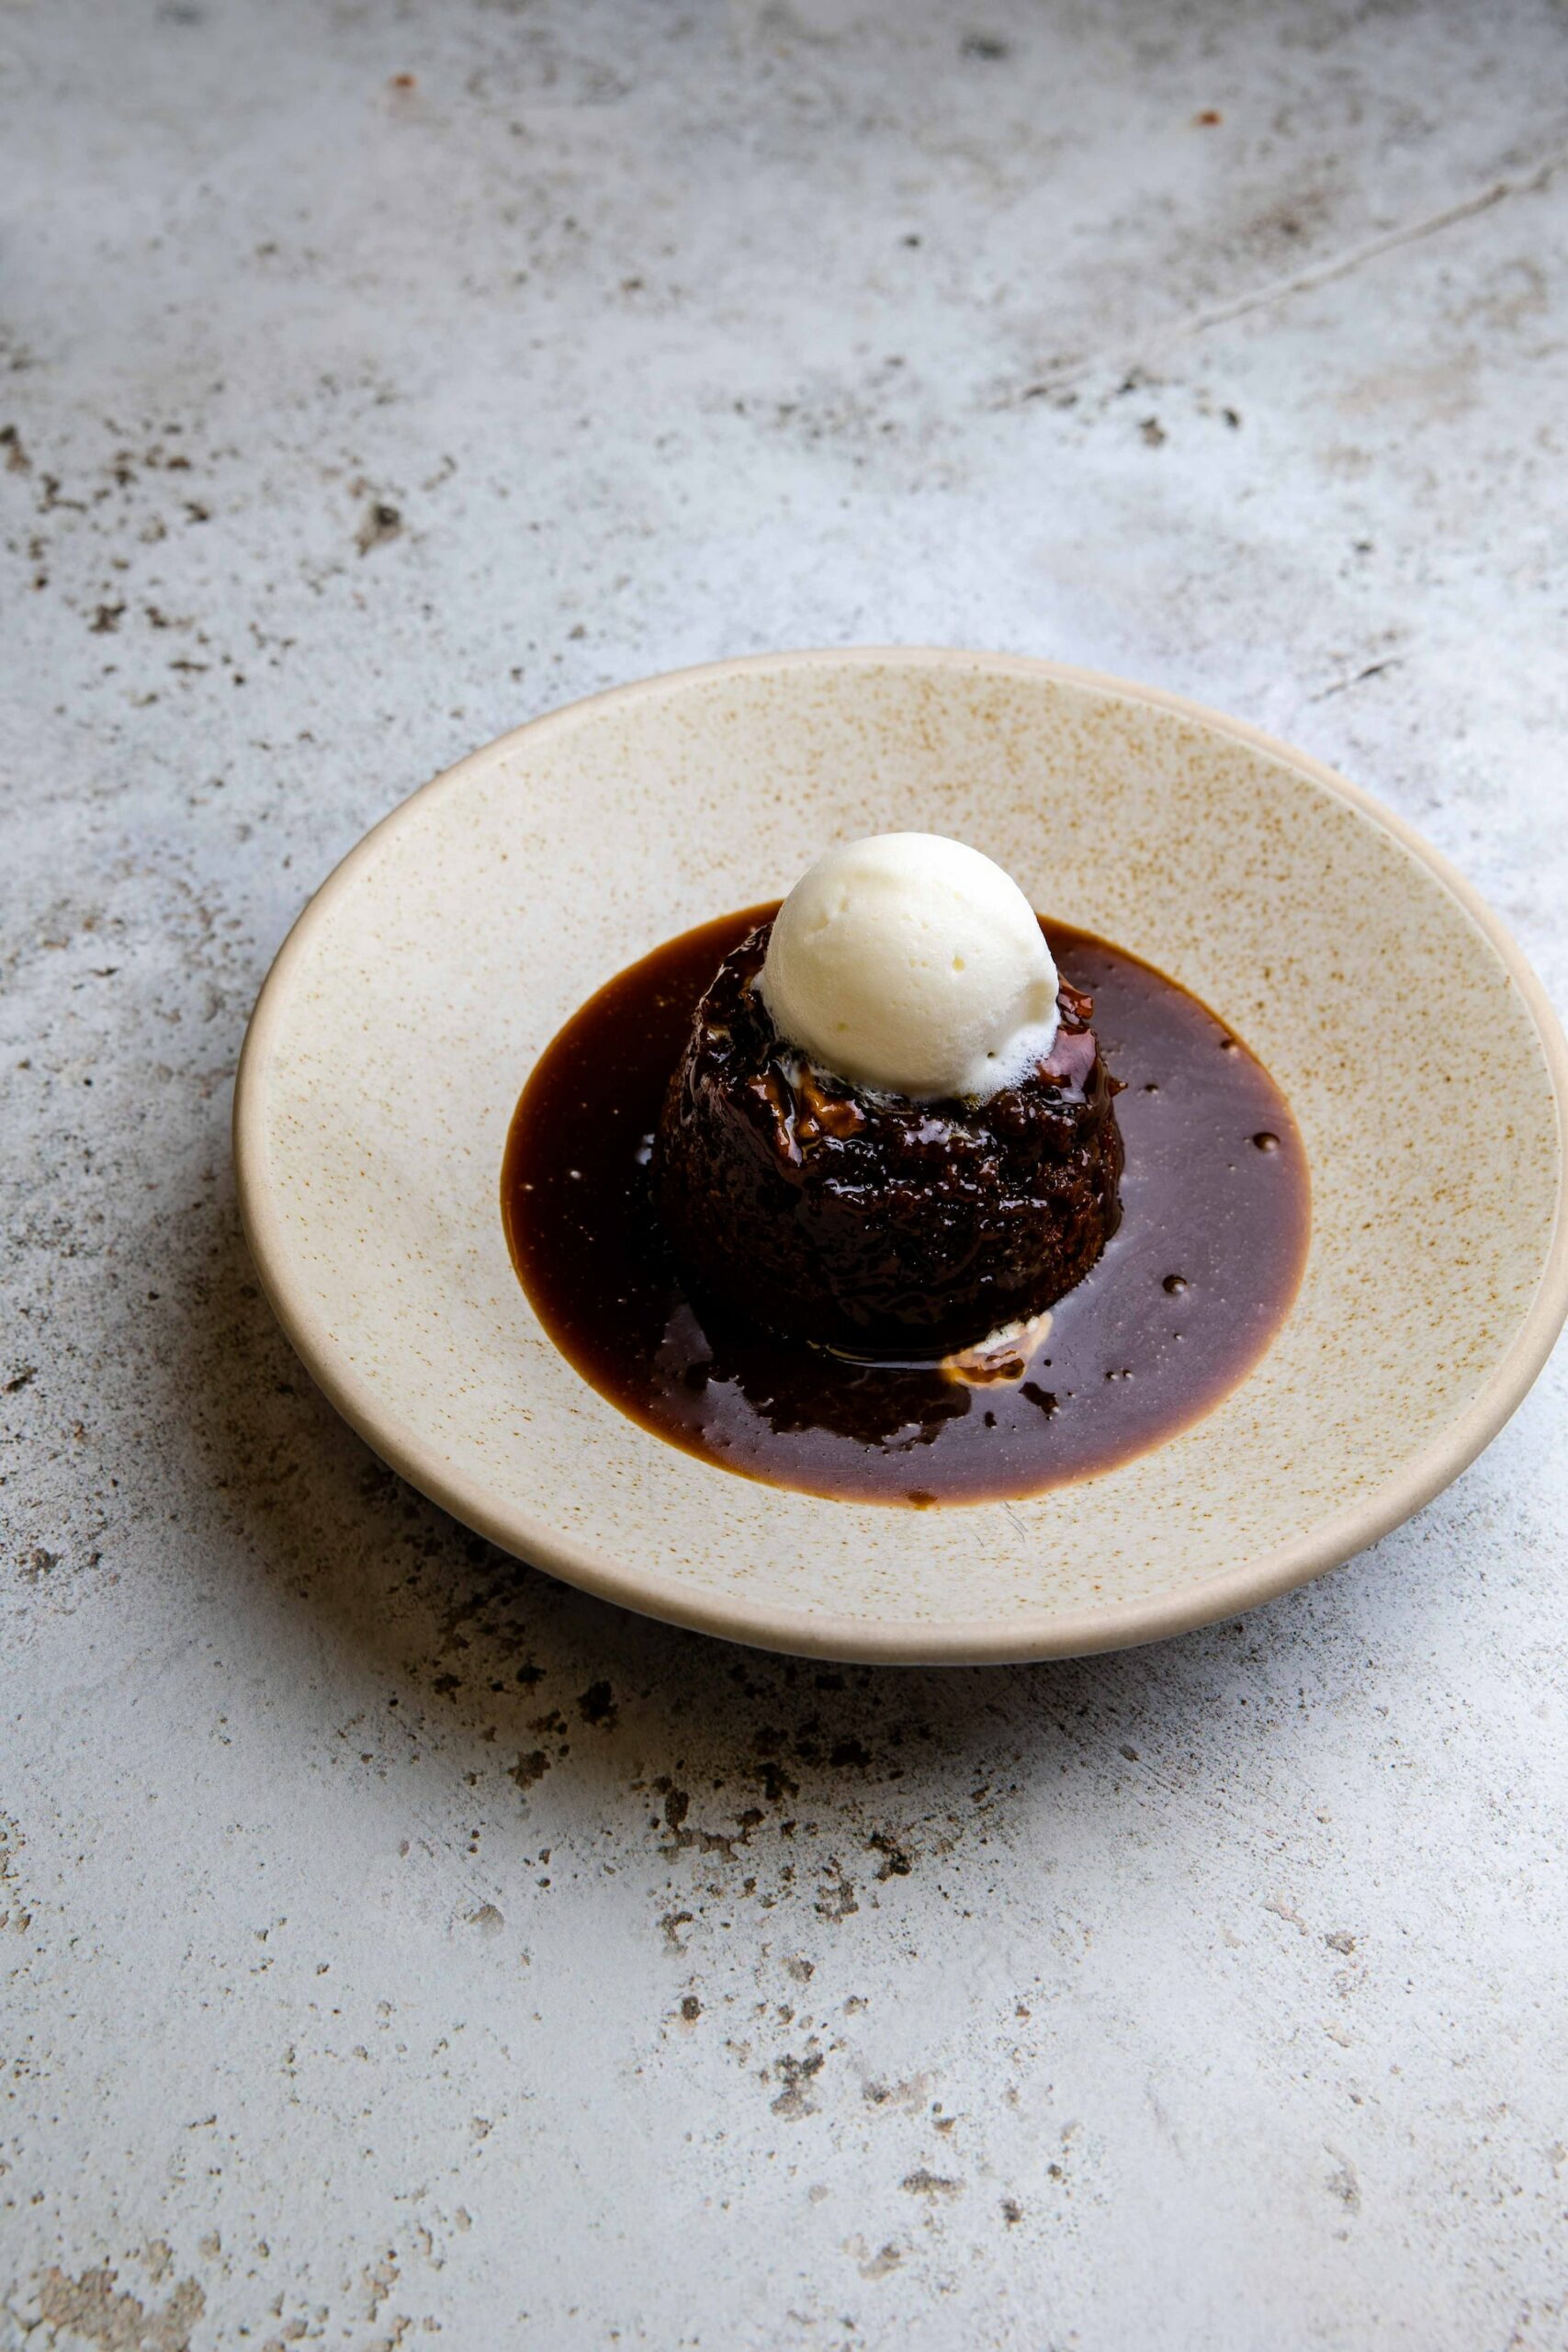 Gordon Ramsay's got nothing on us! Indulge in this decadent sticky toffee pudding recipe that's made in no time at all. Combine 1/4 cup of flour, 1/4 cup of brown sugar, 1/4 cup of milk, 1 egg, and 1/2 teaspoon of baking soda. Microwave for 1-2 minutes and let cool. For the sauce, mix 1/4 cup of brown sugar, 2 tablespoons of butter, and 2 tablespoons of cream, then microwave for 1 minute. Pour over the pudding for a sticky, sweet treat and enjoy!